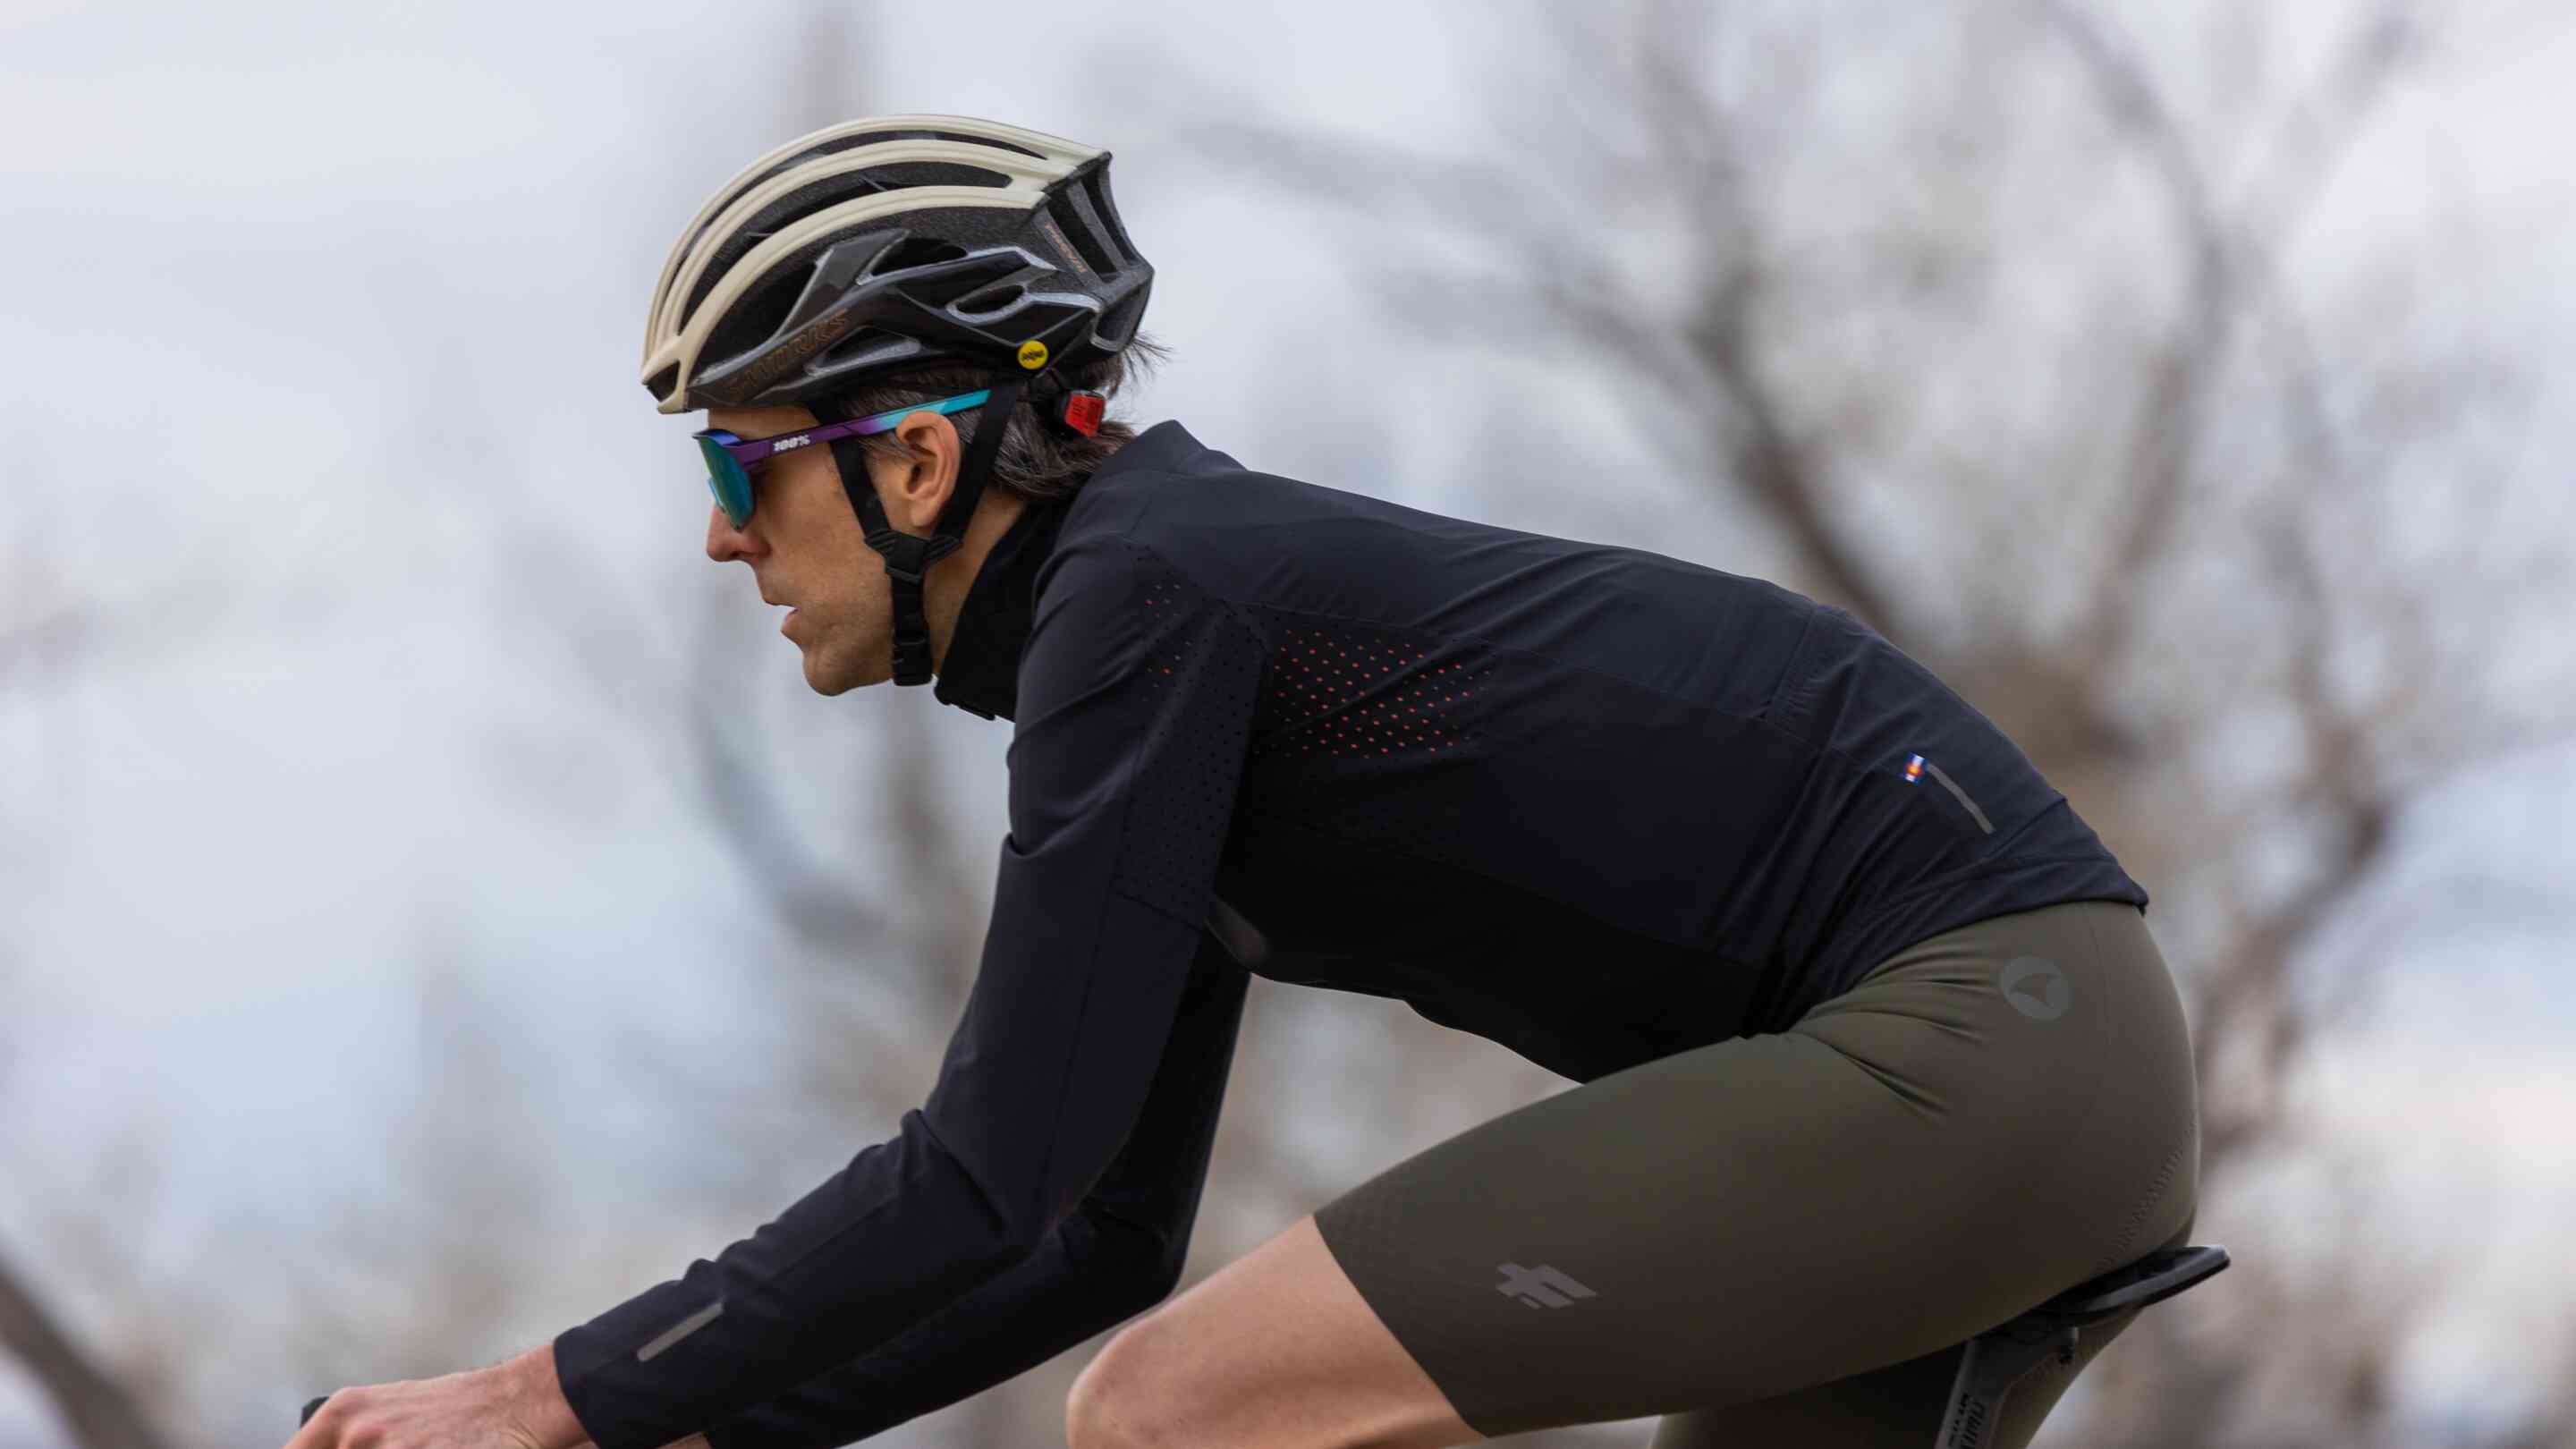 Men's Cycling Jackets for All Weather Conditions